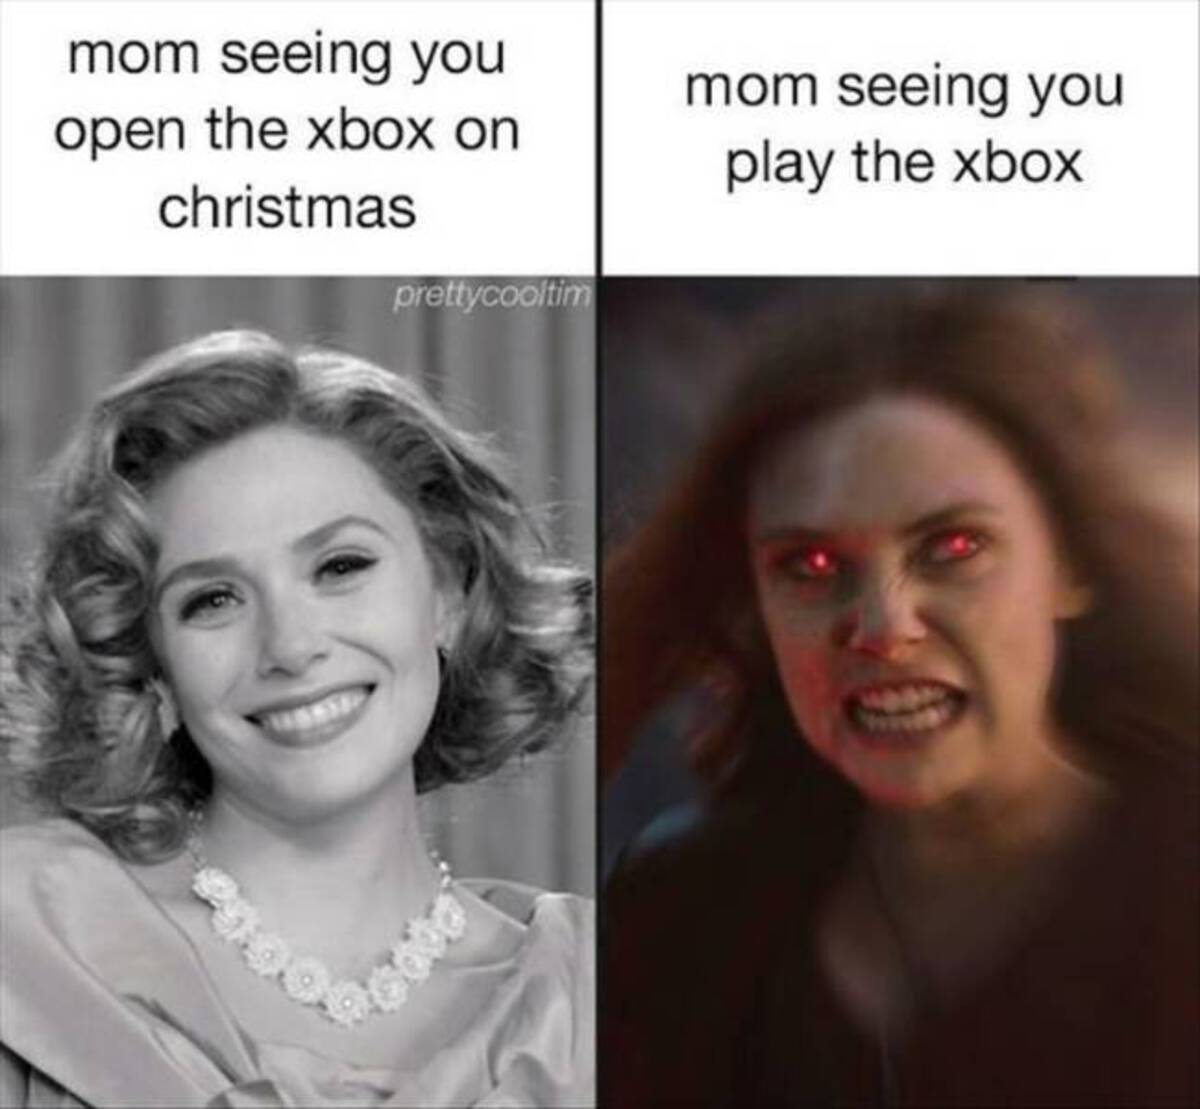 elizabeth olsen 50s - mom seeing you mom seeing you open the xbox on play the xbox christmas prettycooltim 00096